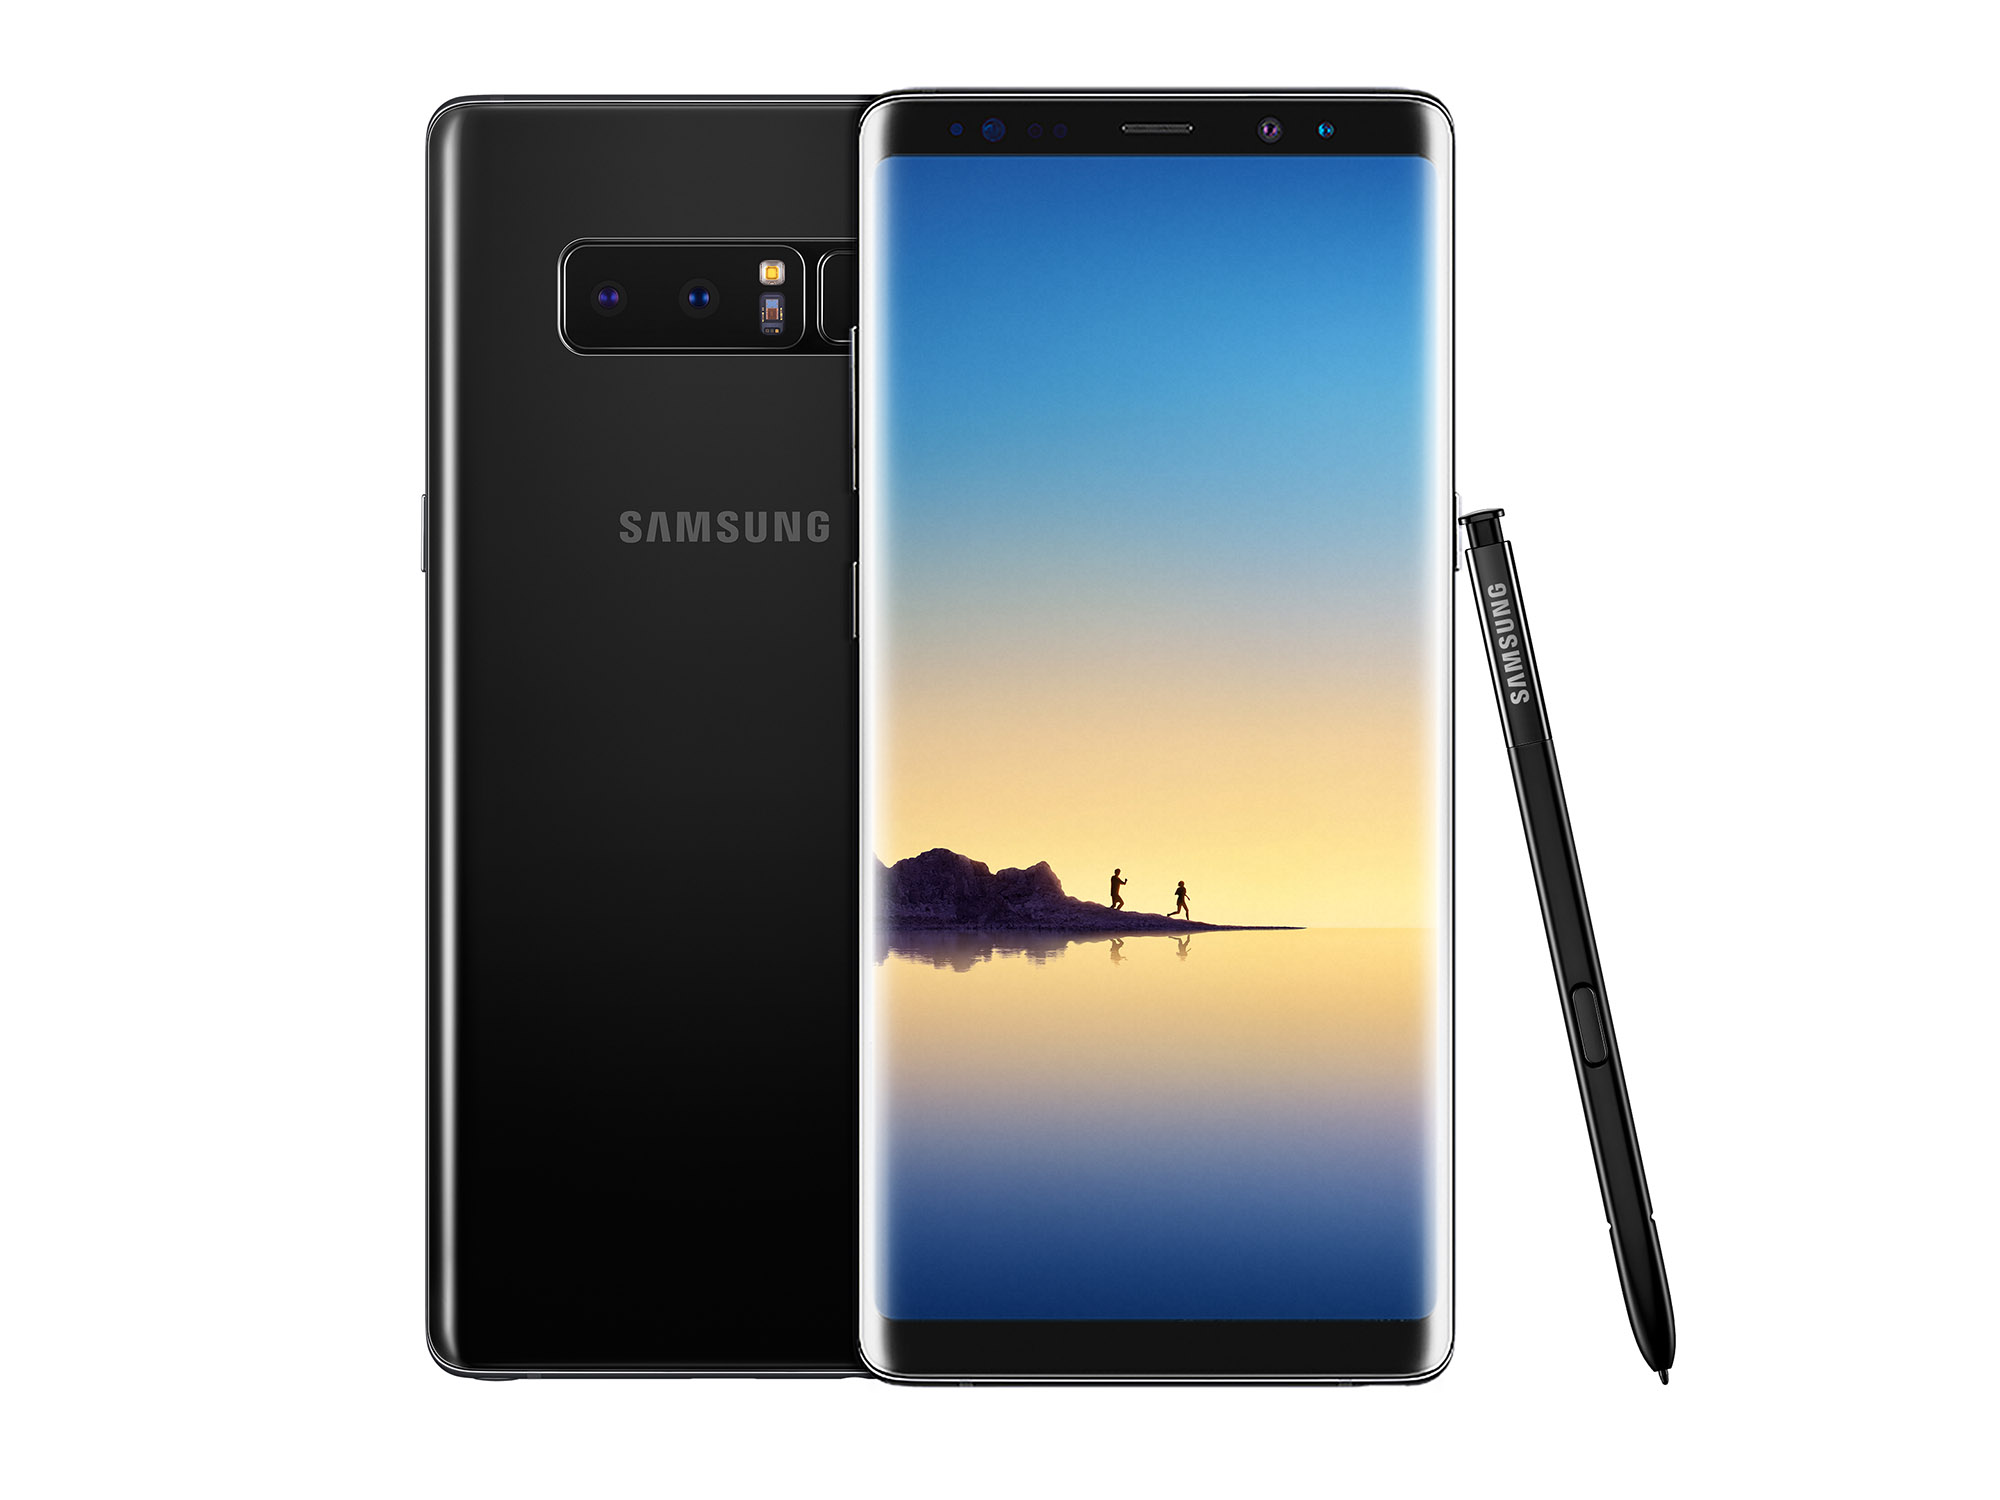 Samsung Galaxy Note 8: The best smartphone for zoom - DxOMark
